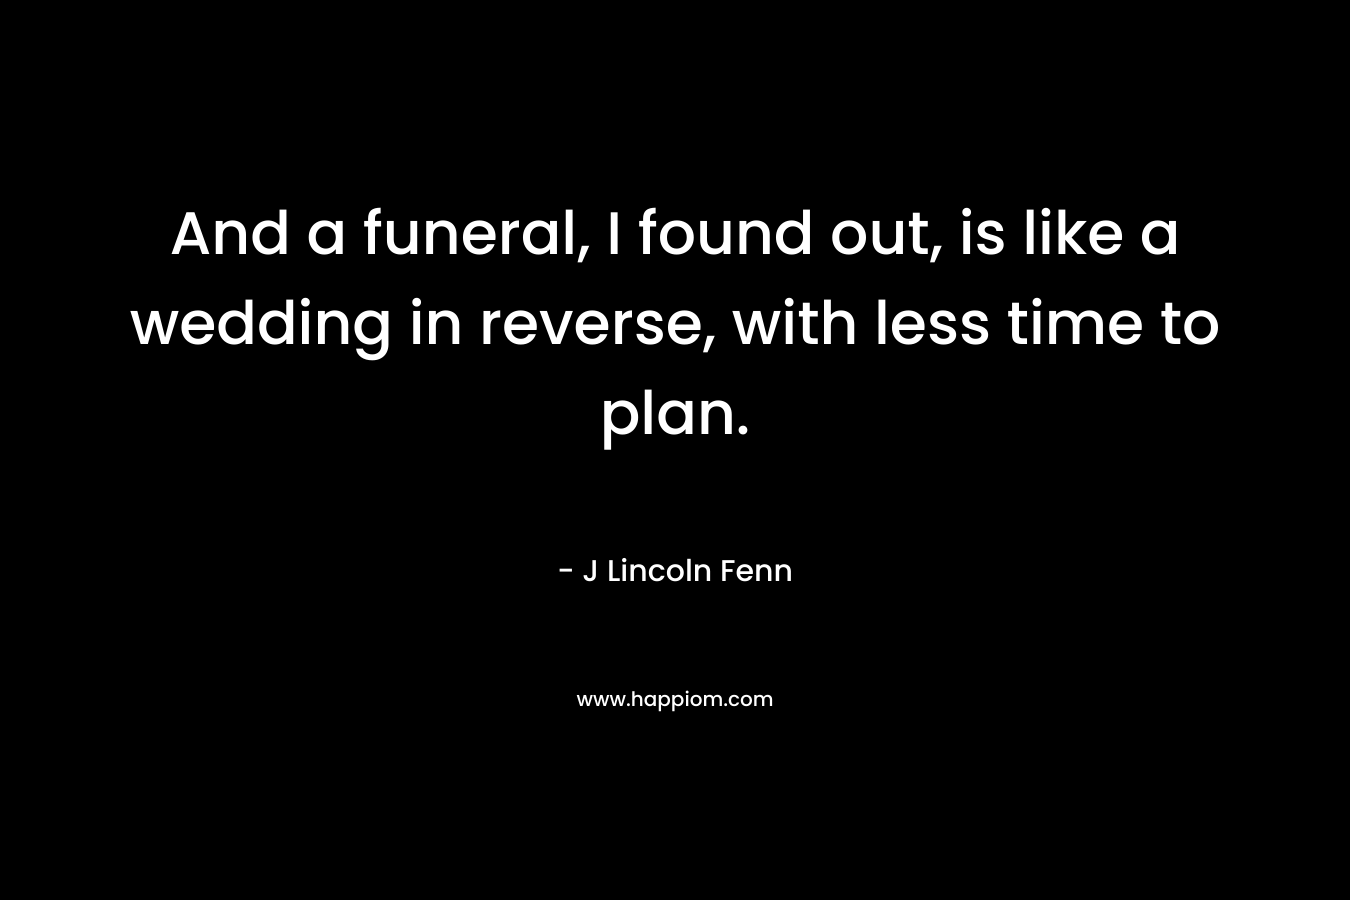 And a funeral, I found out, is like a wedding in reverse, with less time to plan.